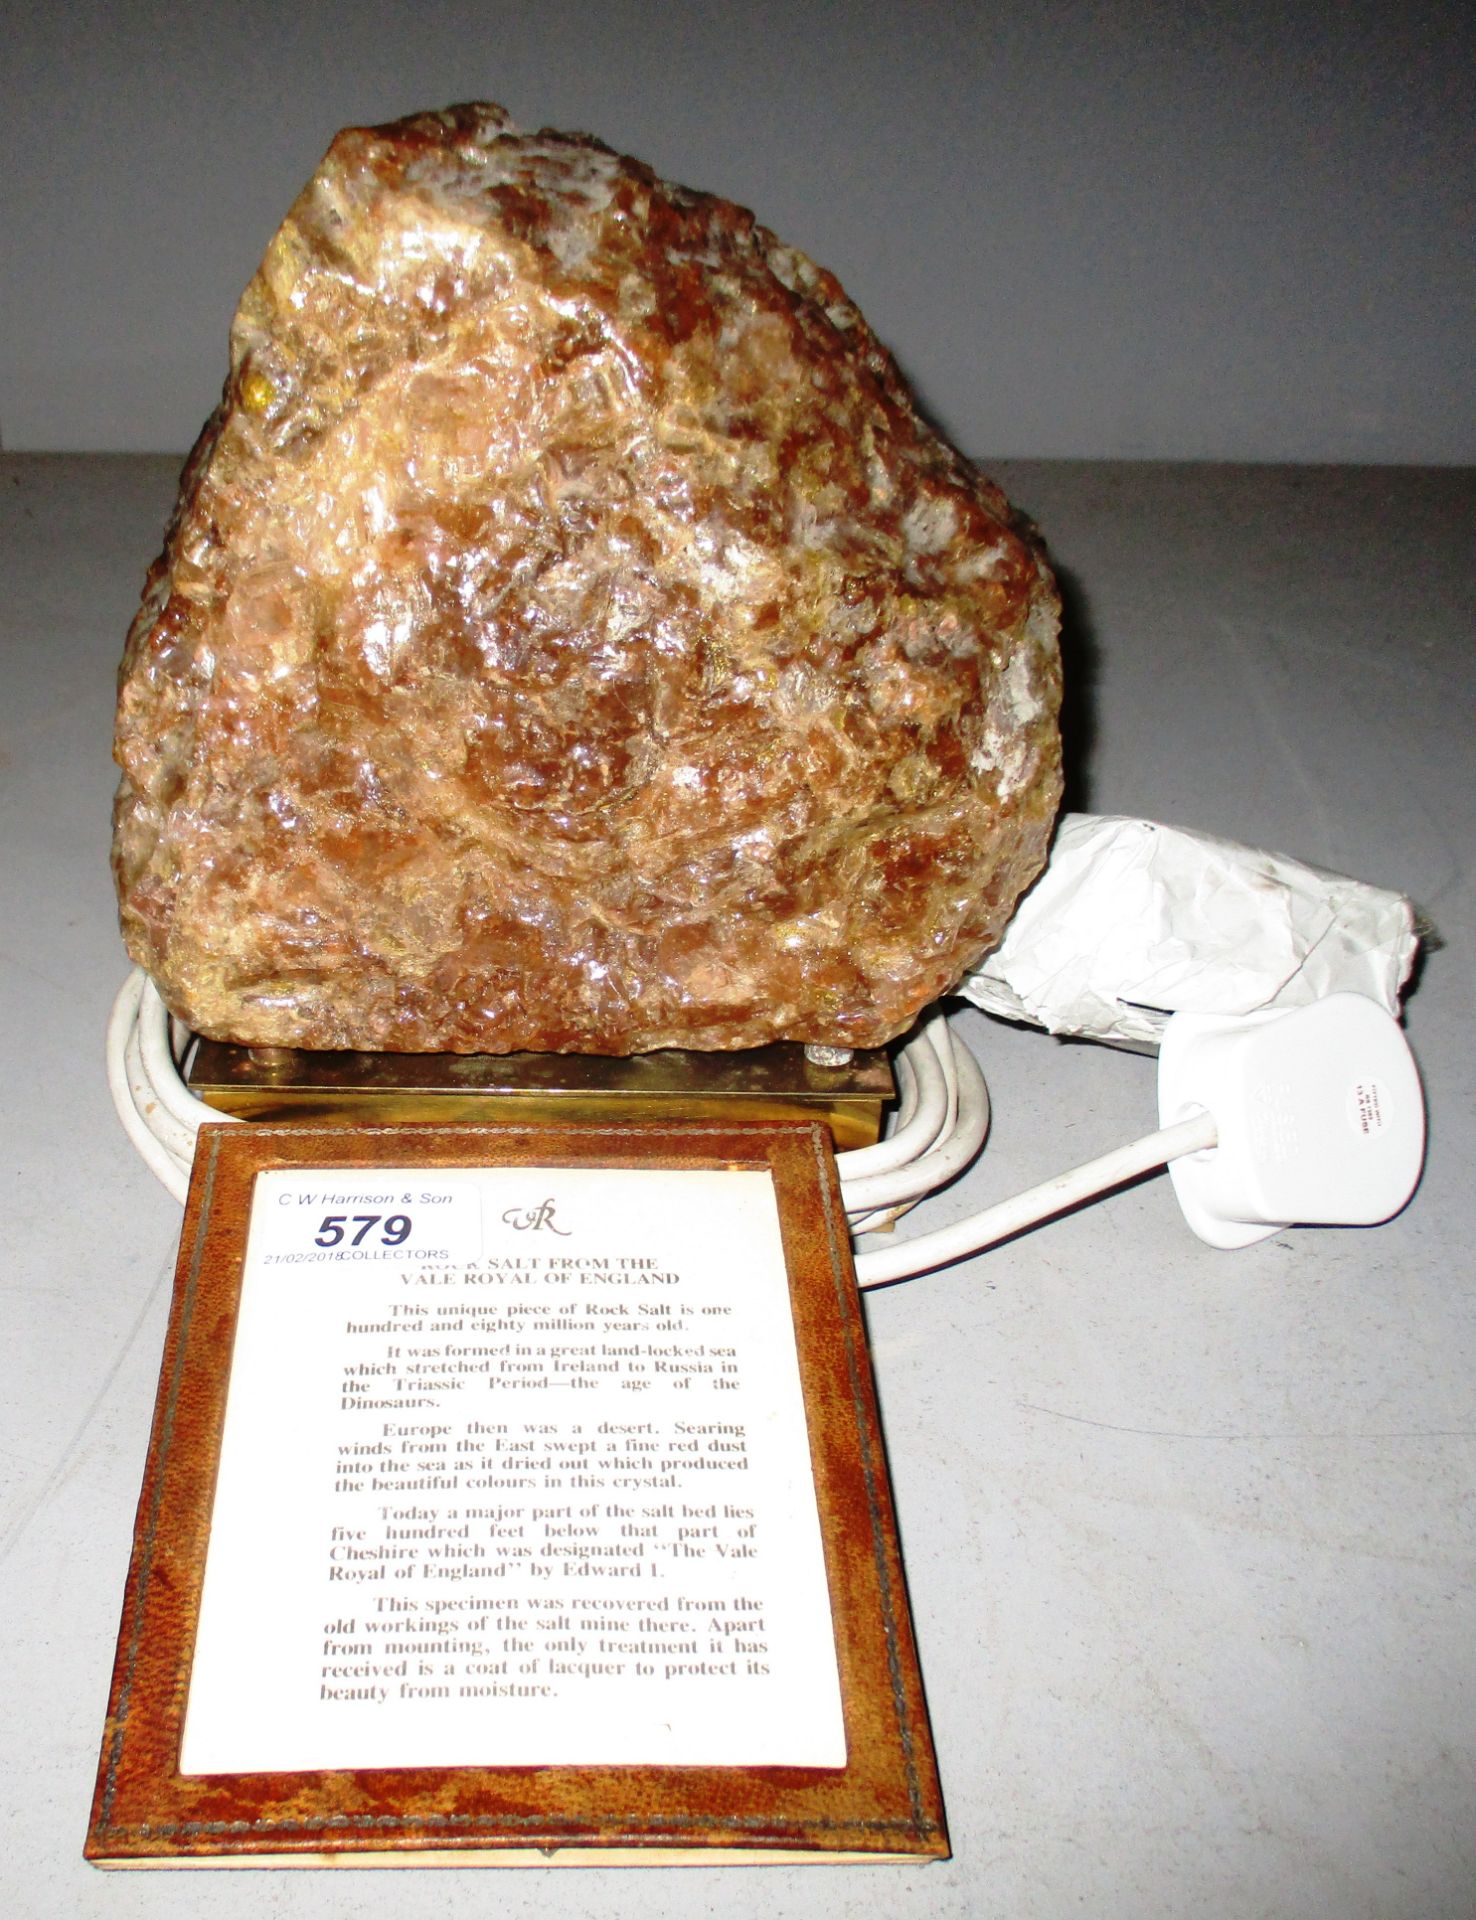 An unusual table lamp made from Rock Salt from the Vale Royal of England mounted on a brass stand